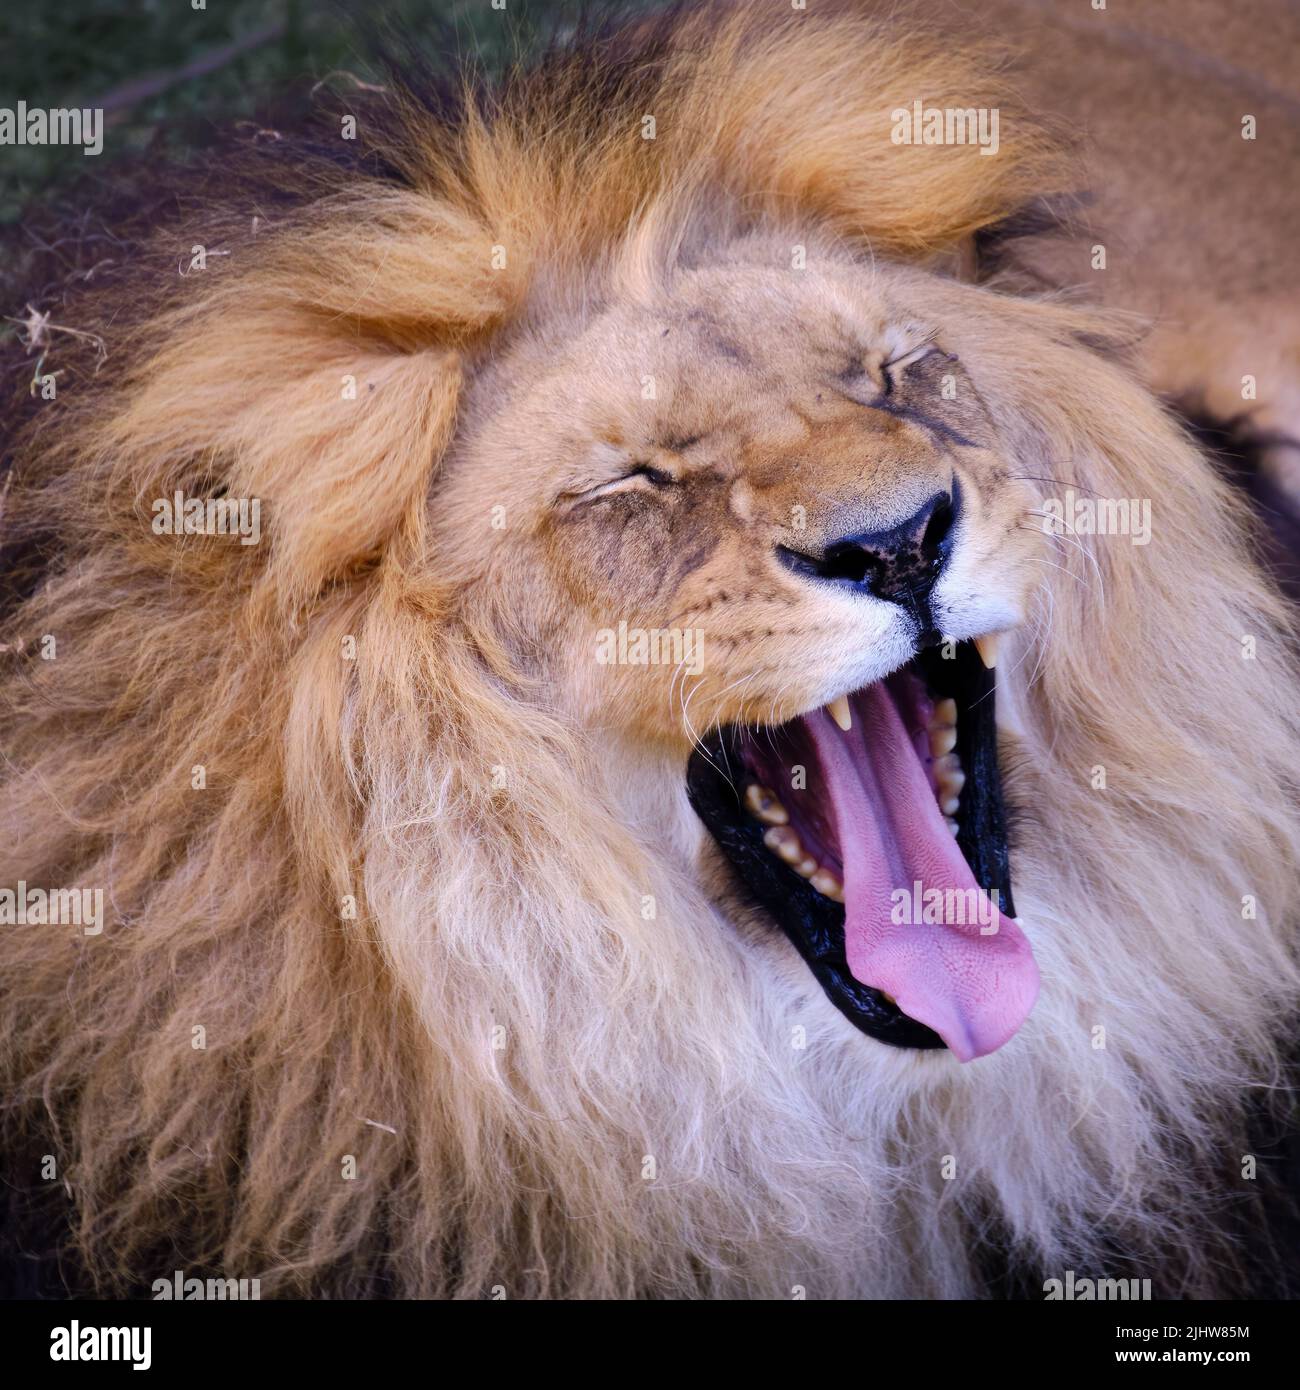 African lion (Panthera leo) beautiful portrait of the king of the jungle, a mighty African lion. Stock Photo